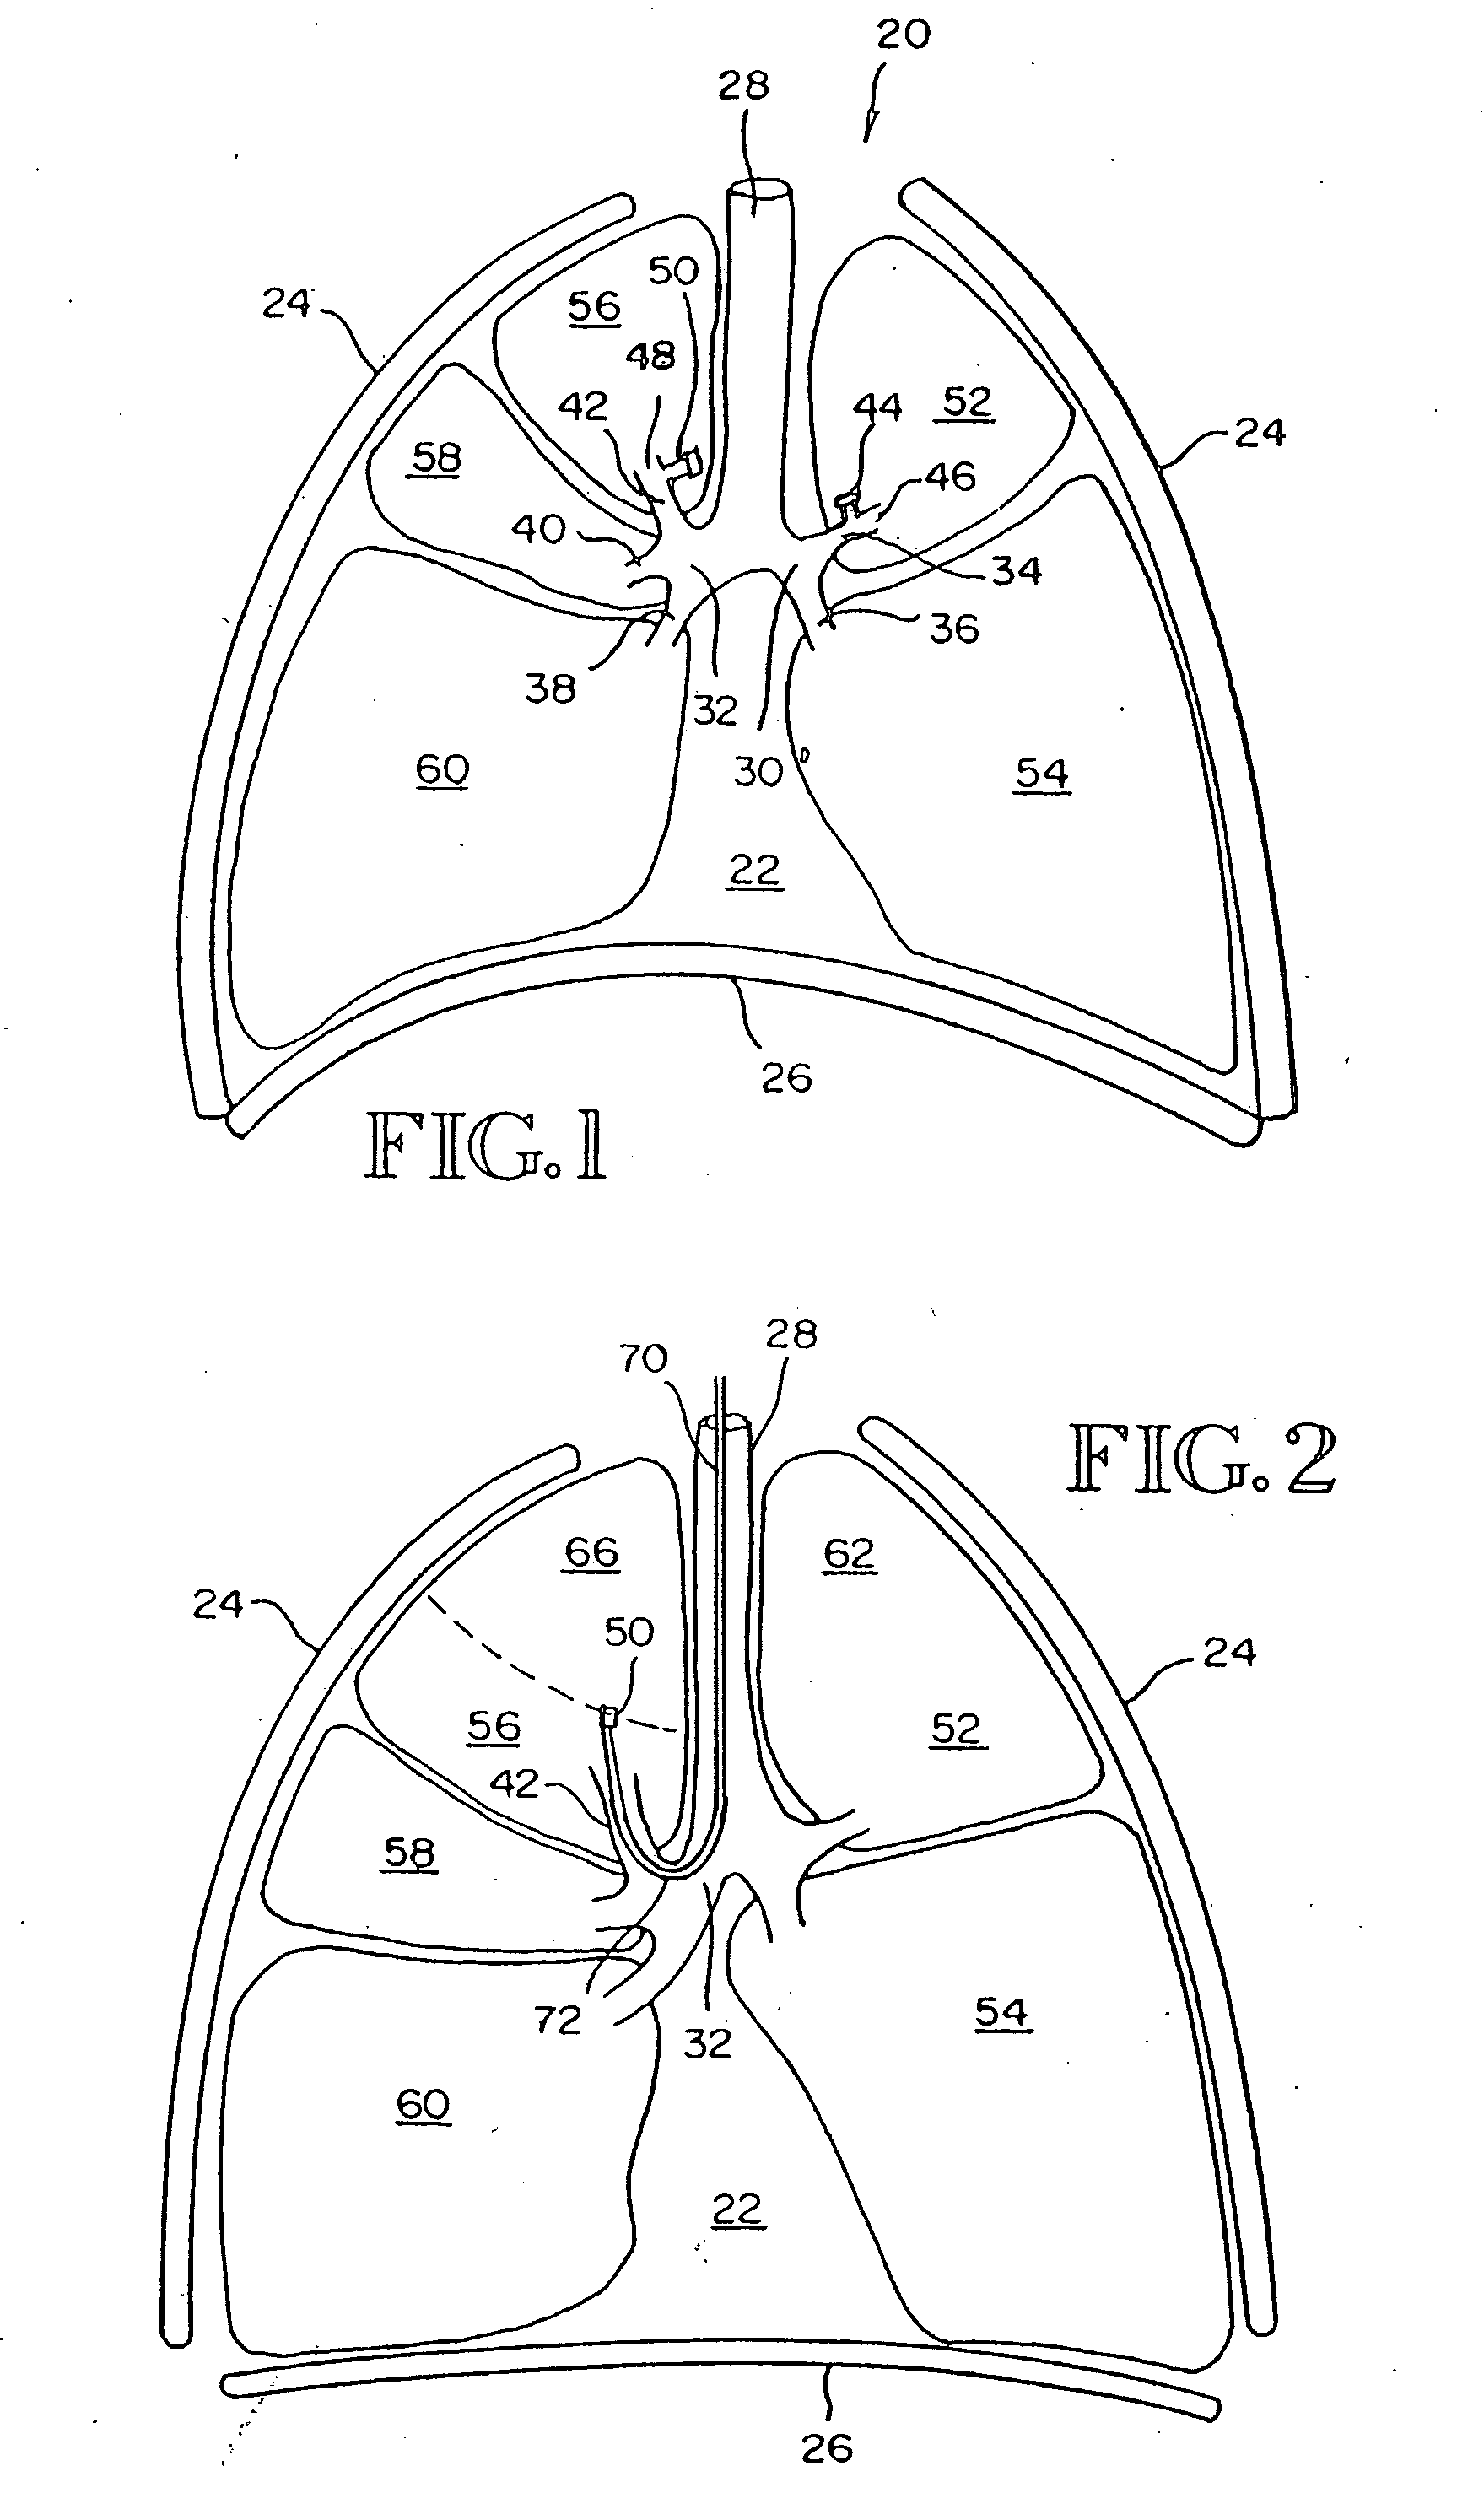 Intra-bronchial obstructing device that controls biological interaction with the patient